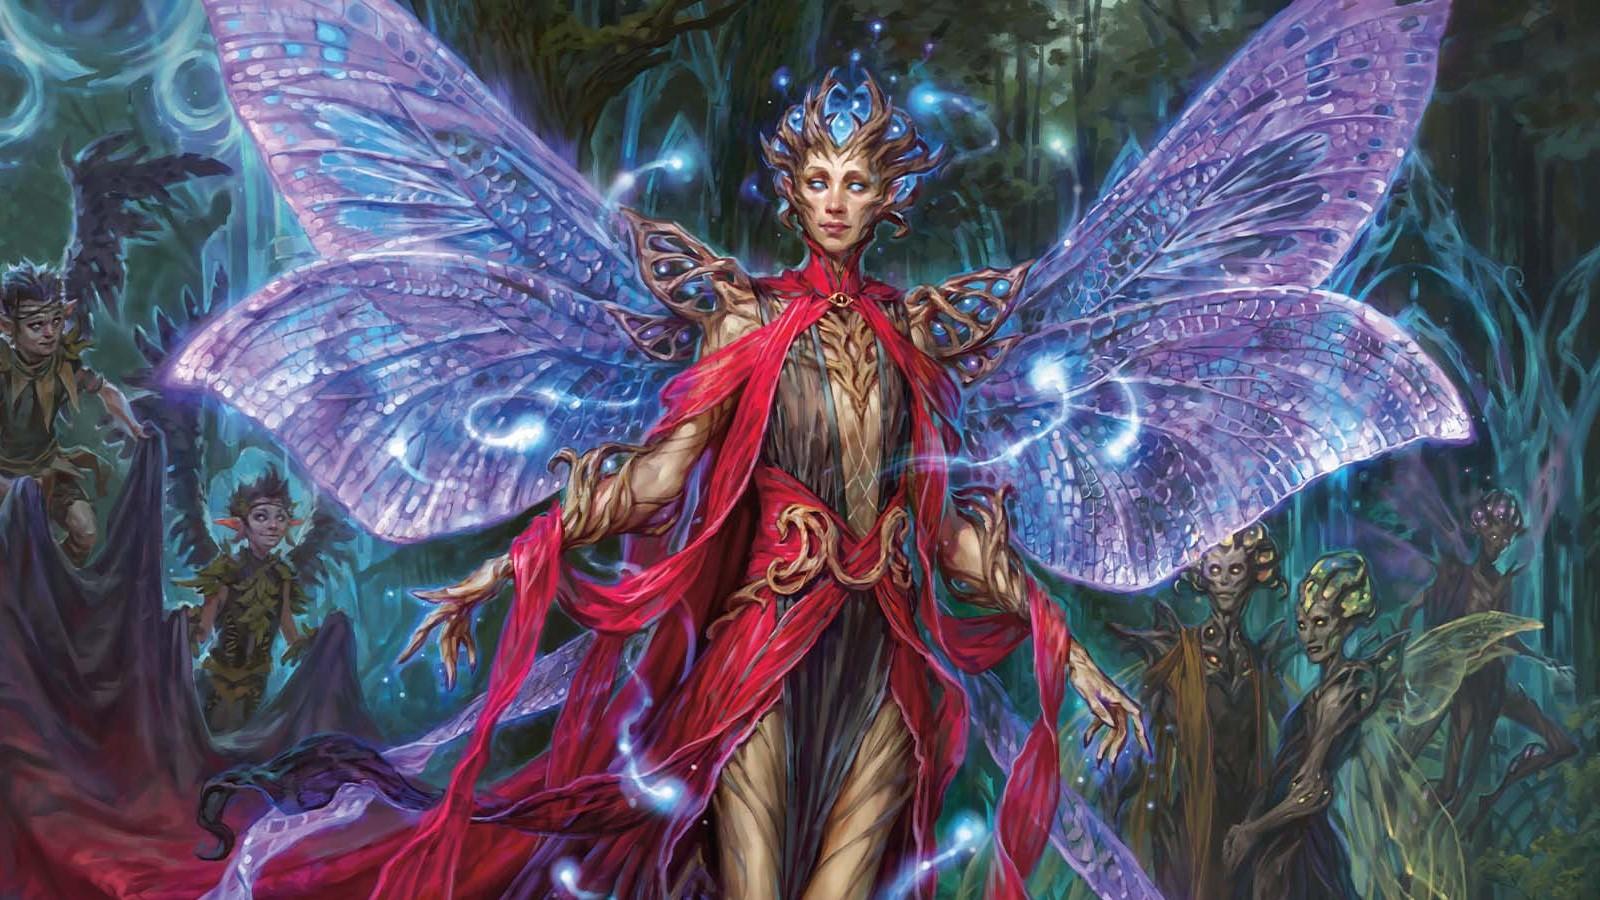 MTG Fae Dominion Decklist - The Fae Lord spreads his wings